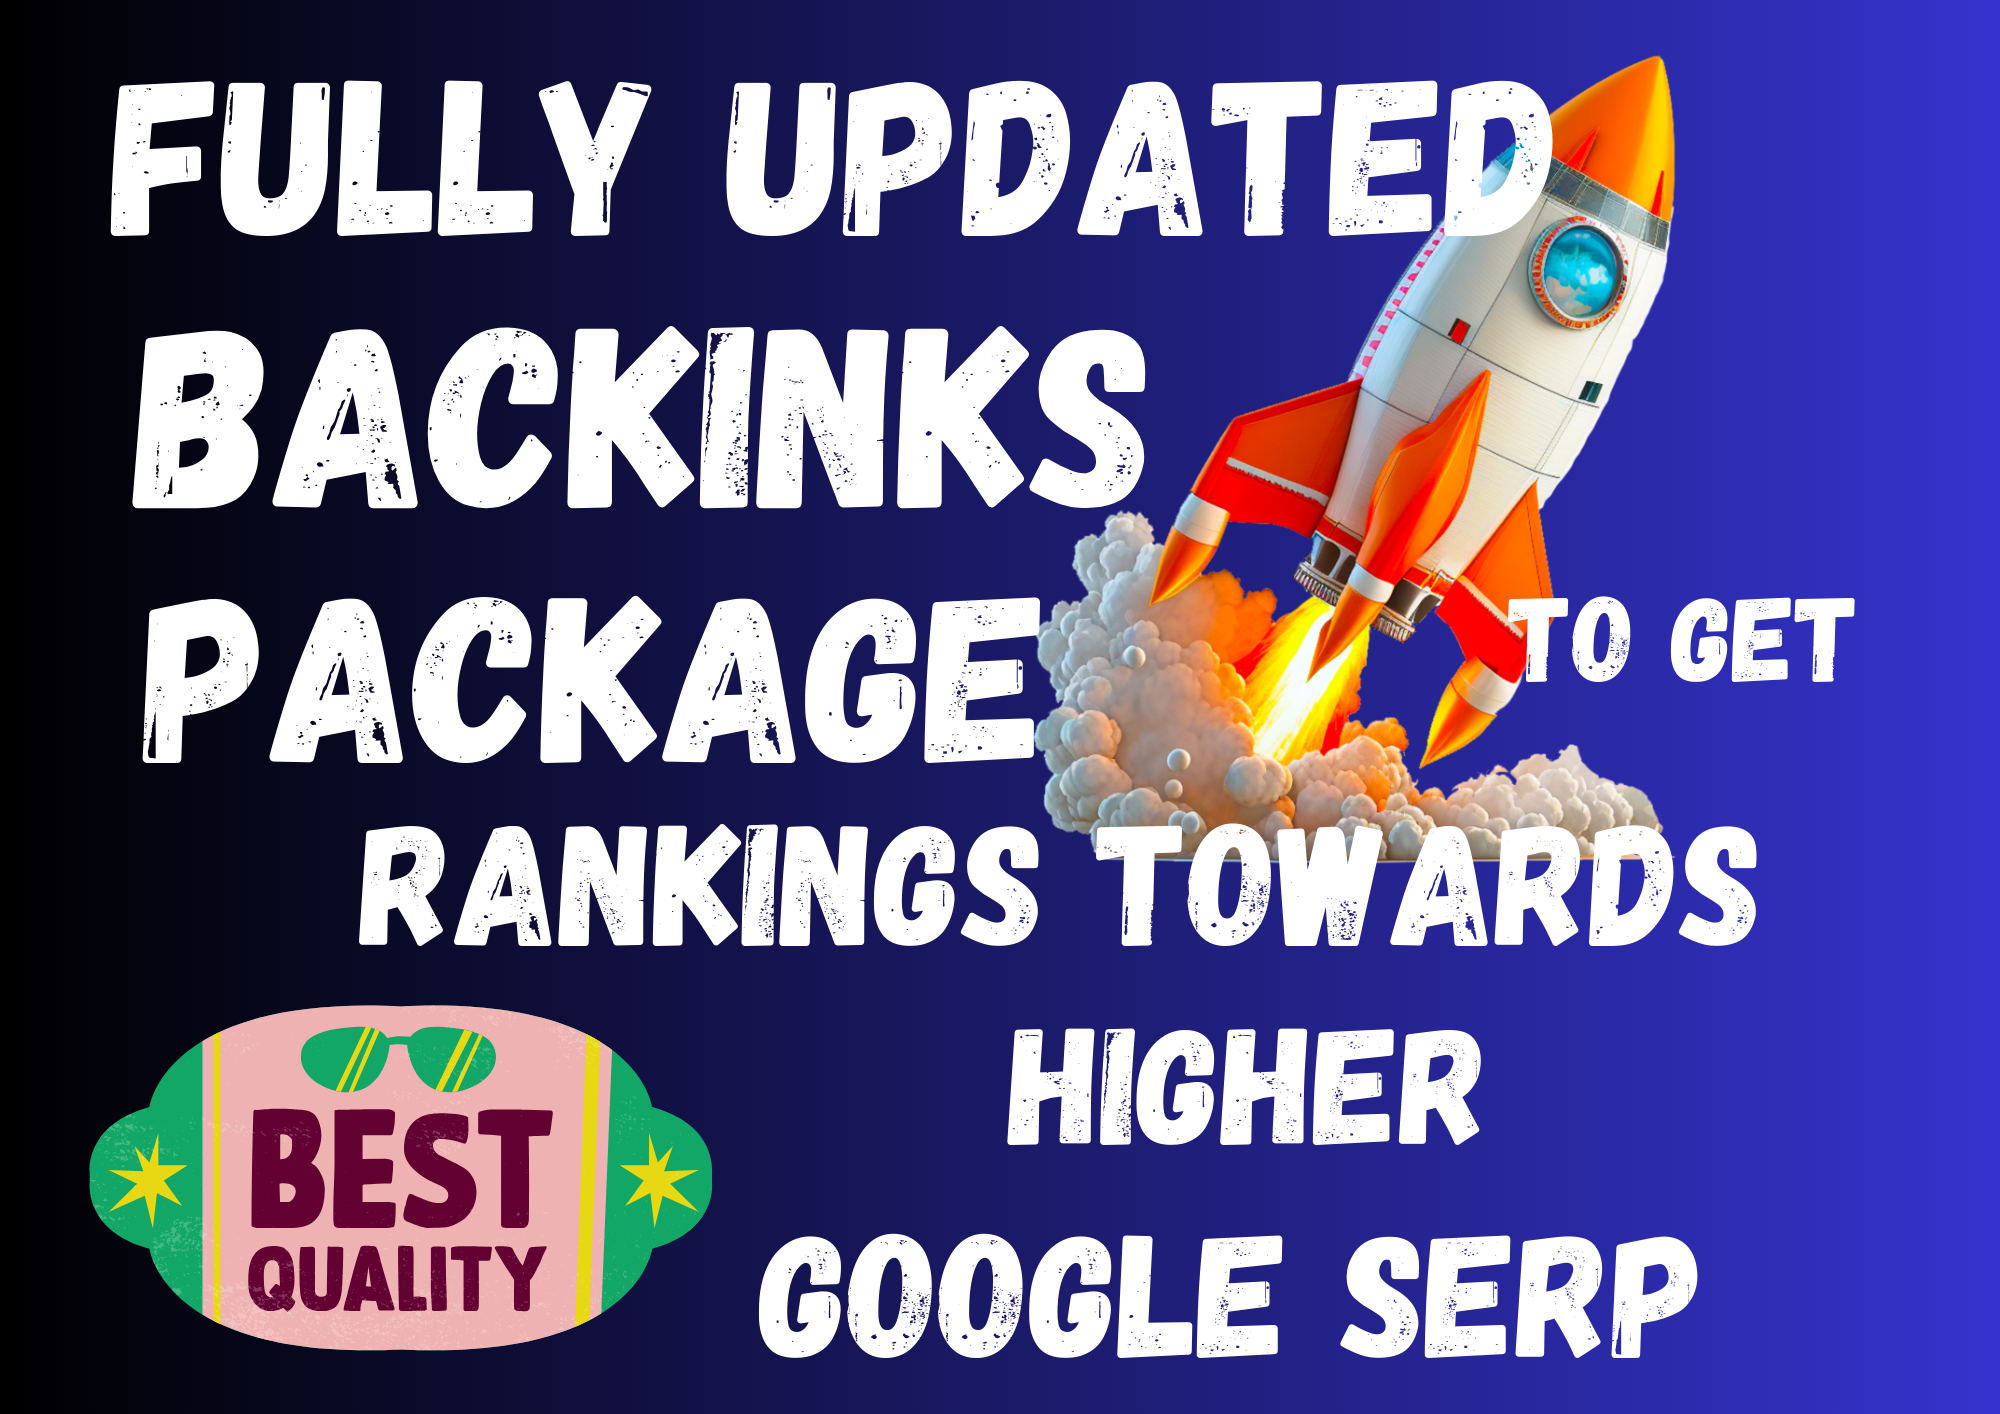 Enhance your ranking towards higher google serp with our latest crafted backlinks package